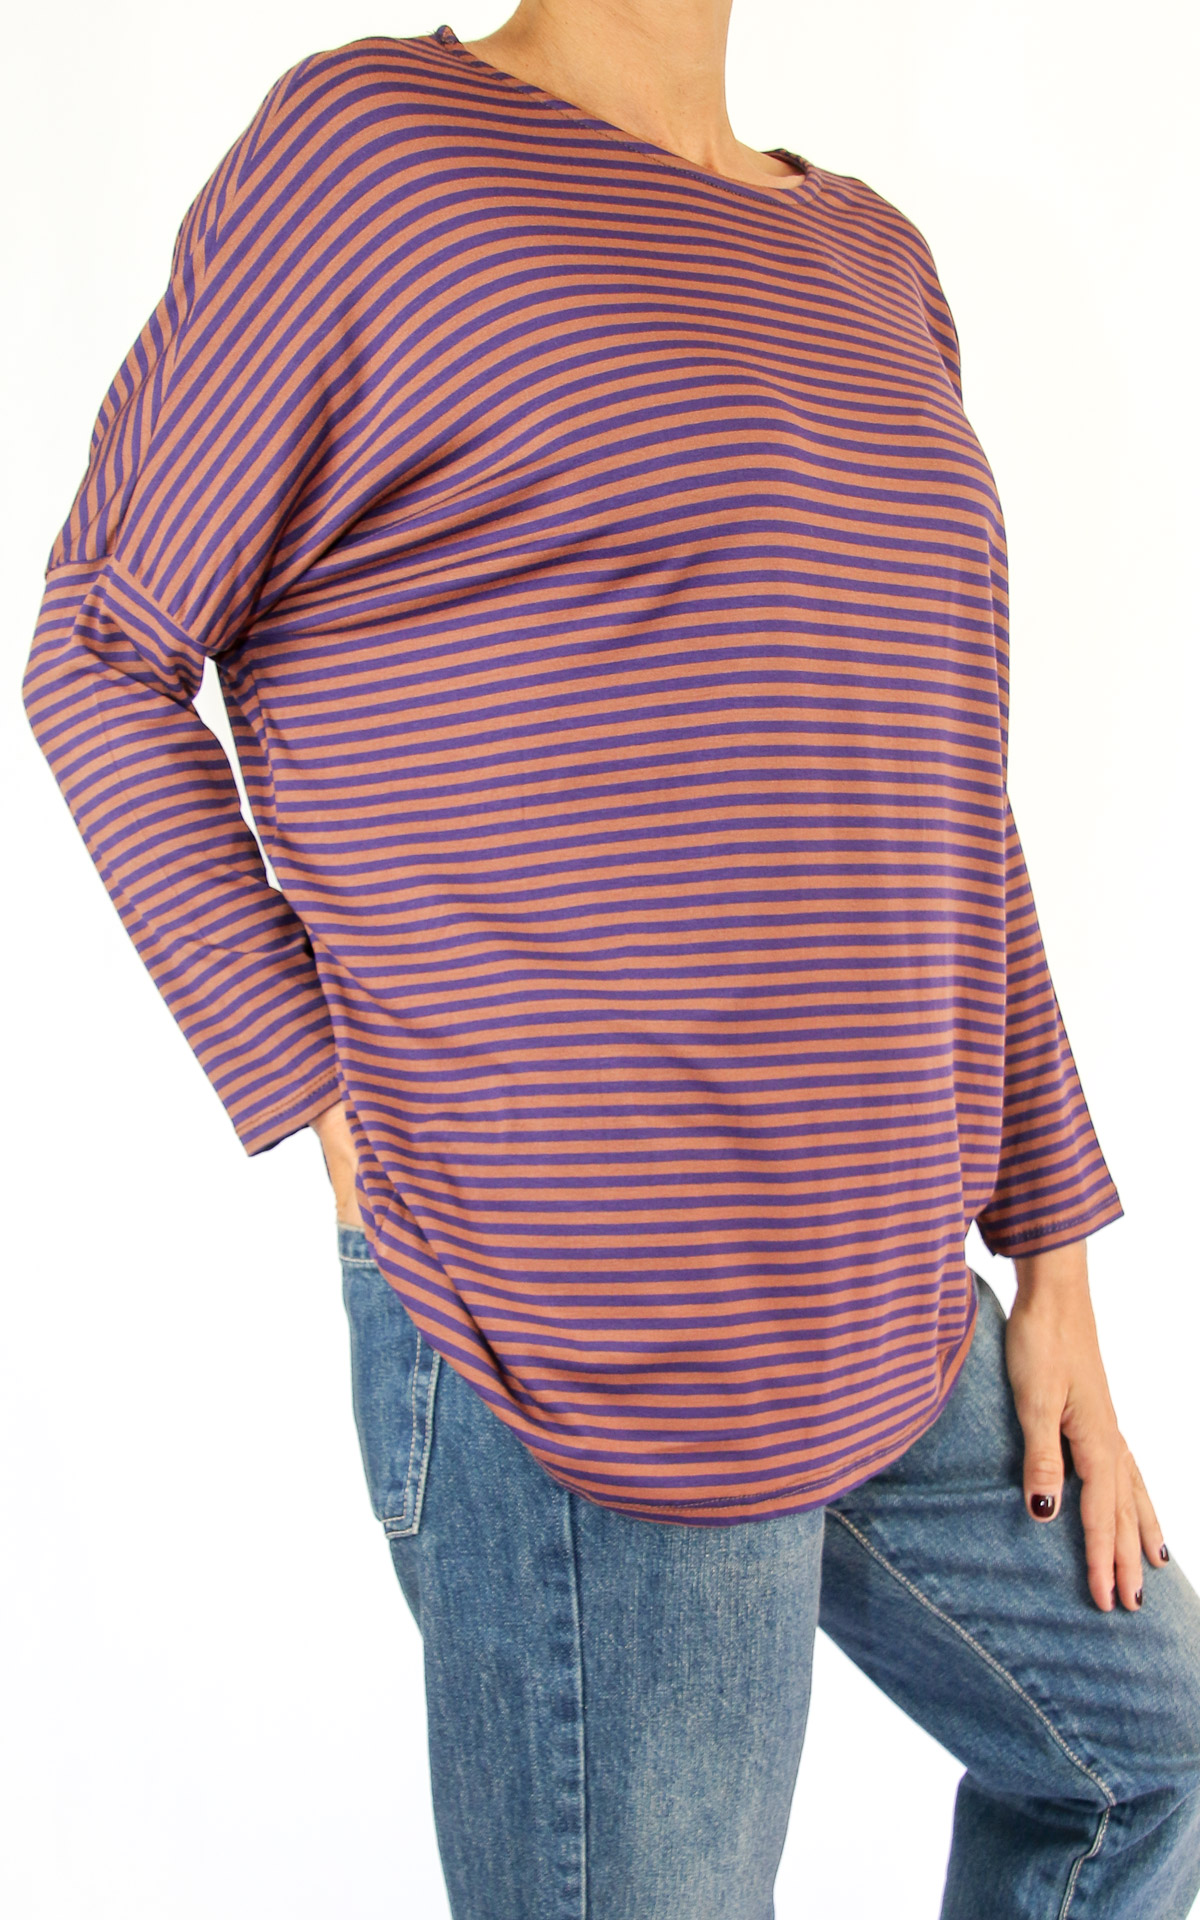 Off-On - t-shirt oversize a righe - viola/camel